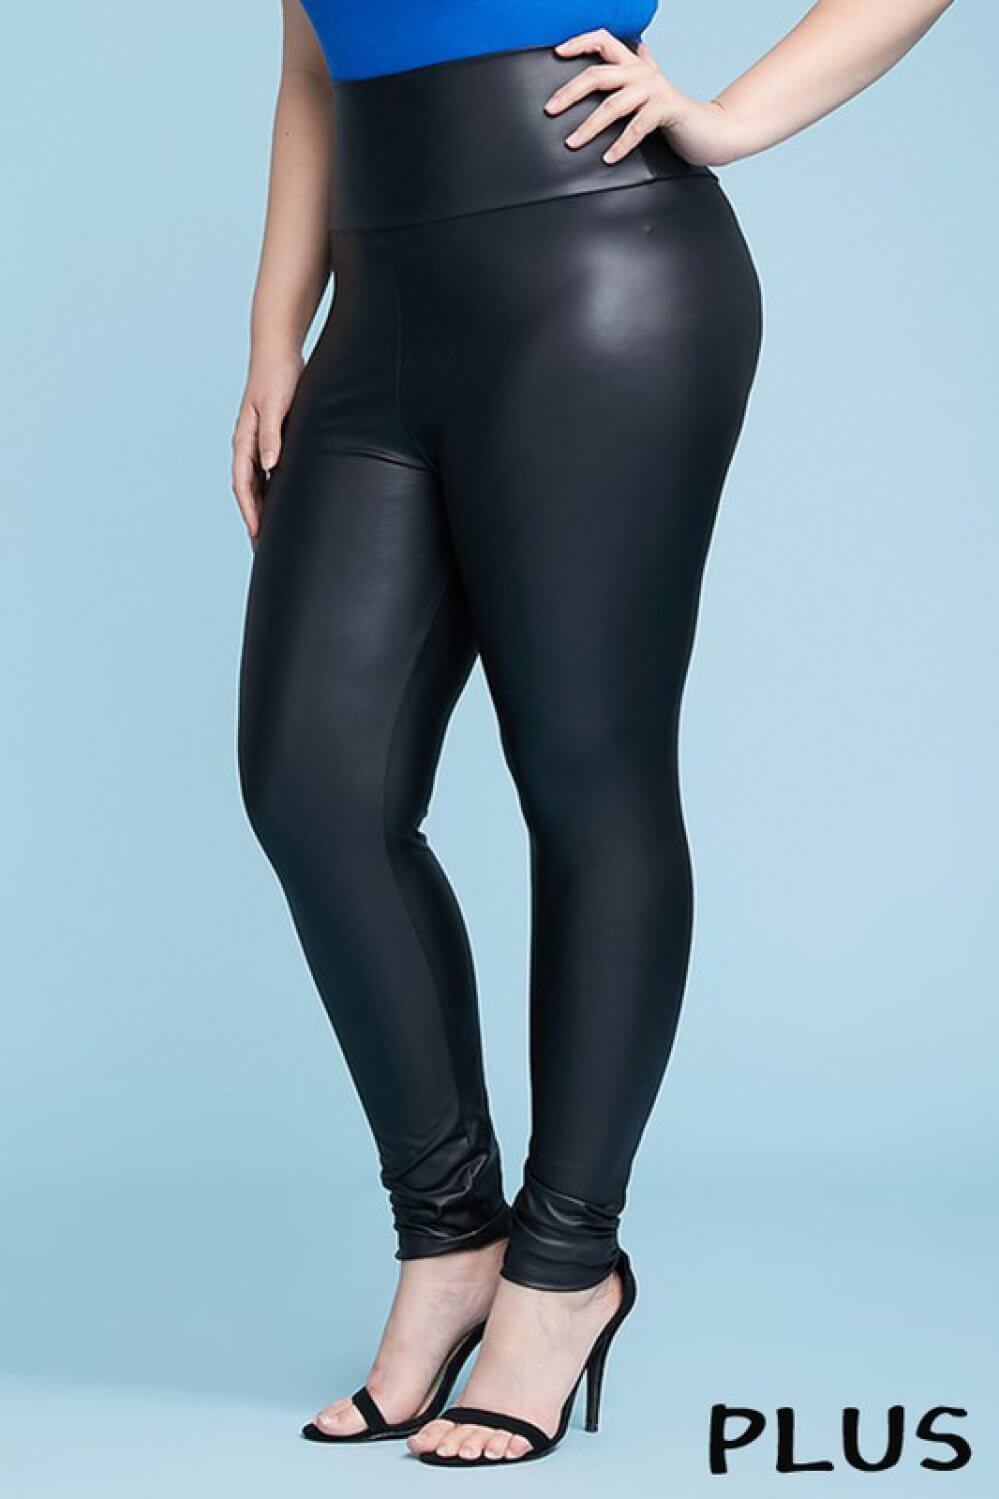 Shop Spandex Leggings Women Plus Size with great discounts and